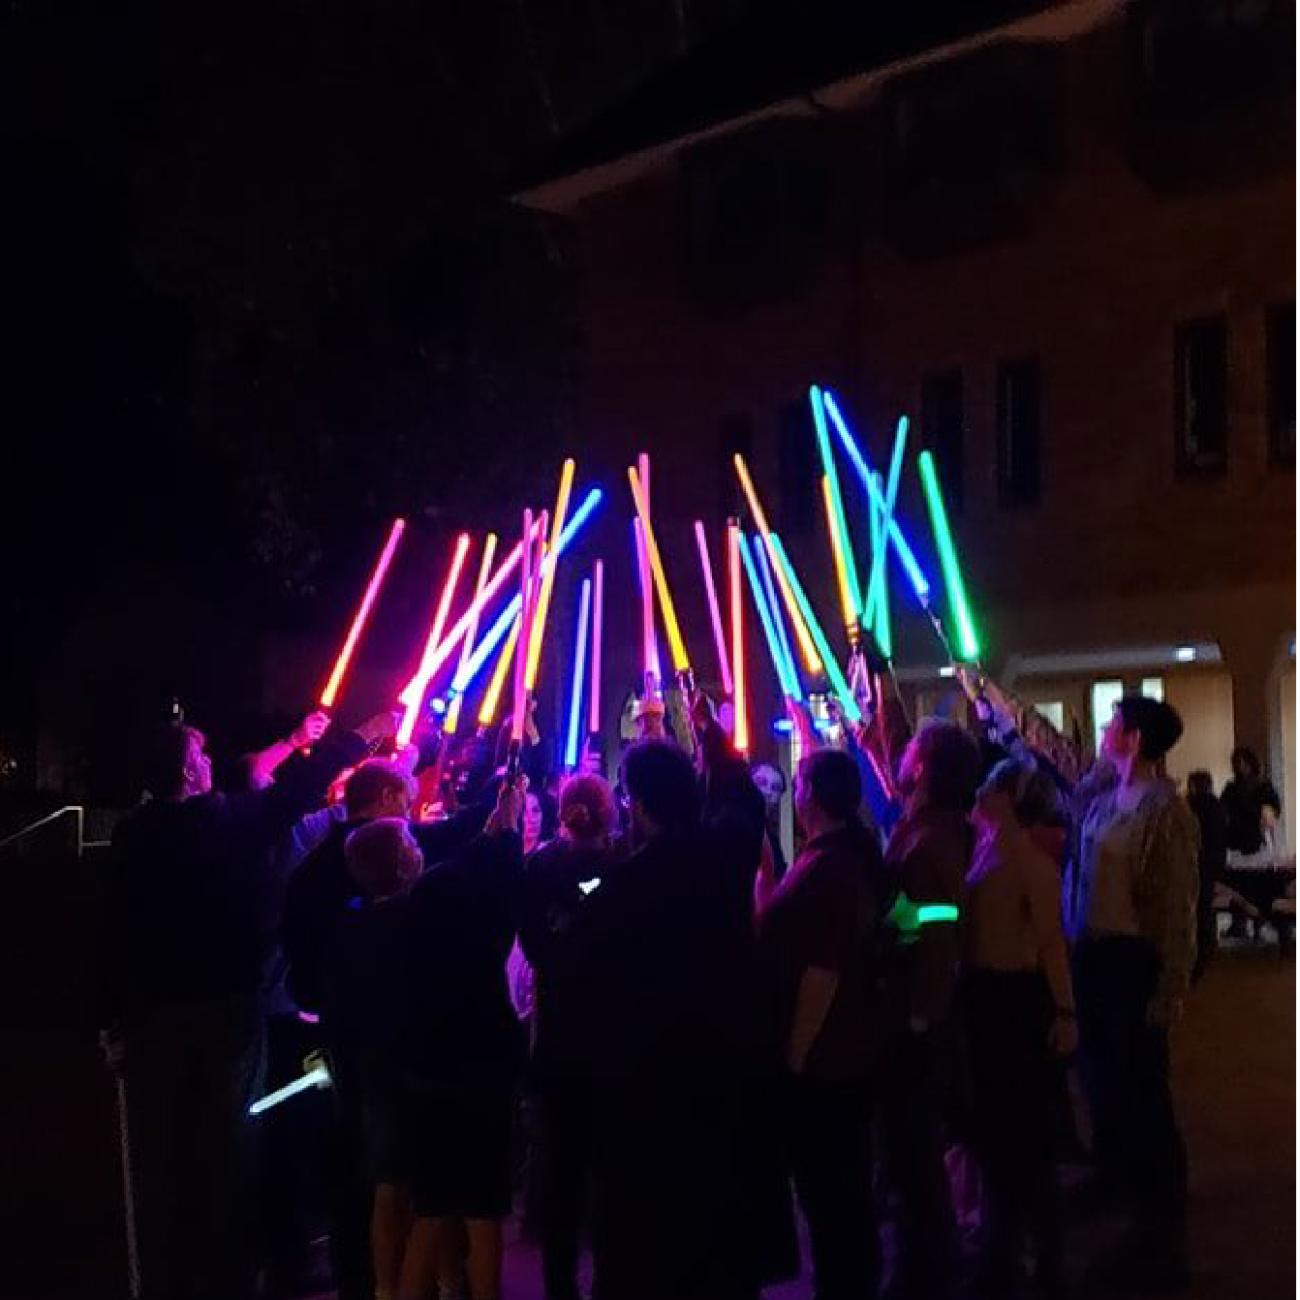 Students pointing lightsabers upwards outside in the dark for an Order of the Saber club meeting